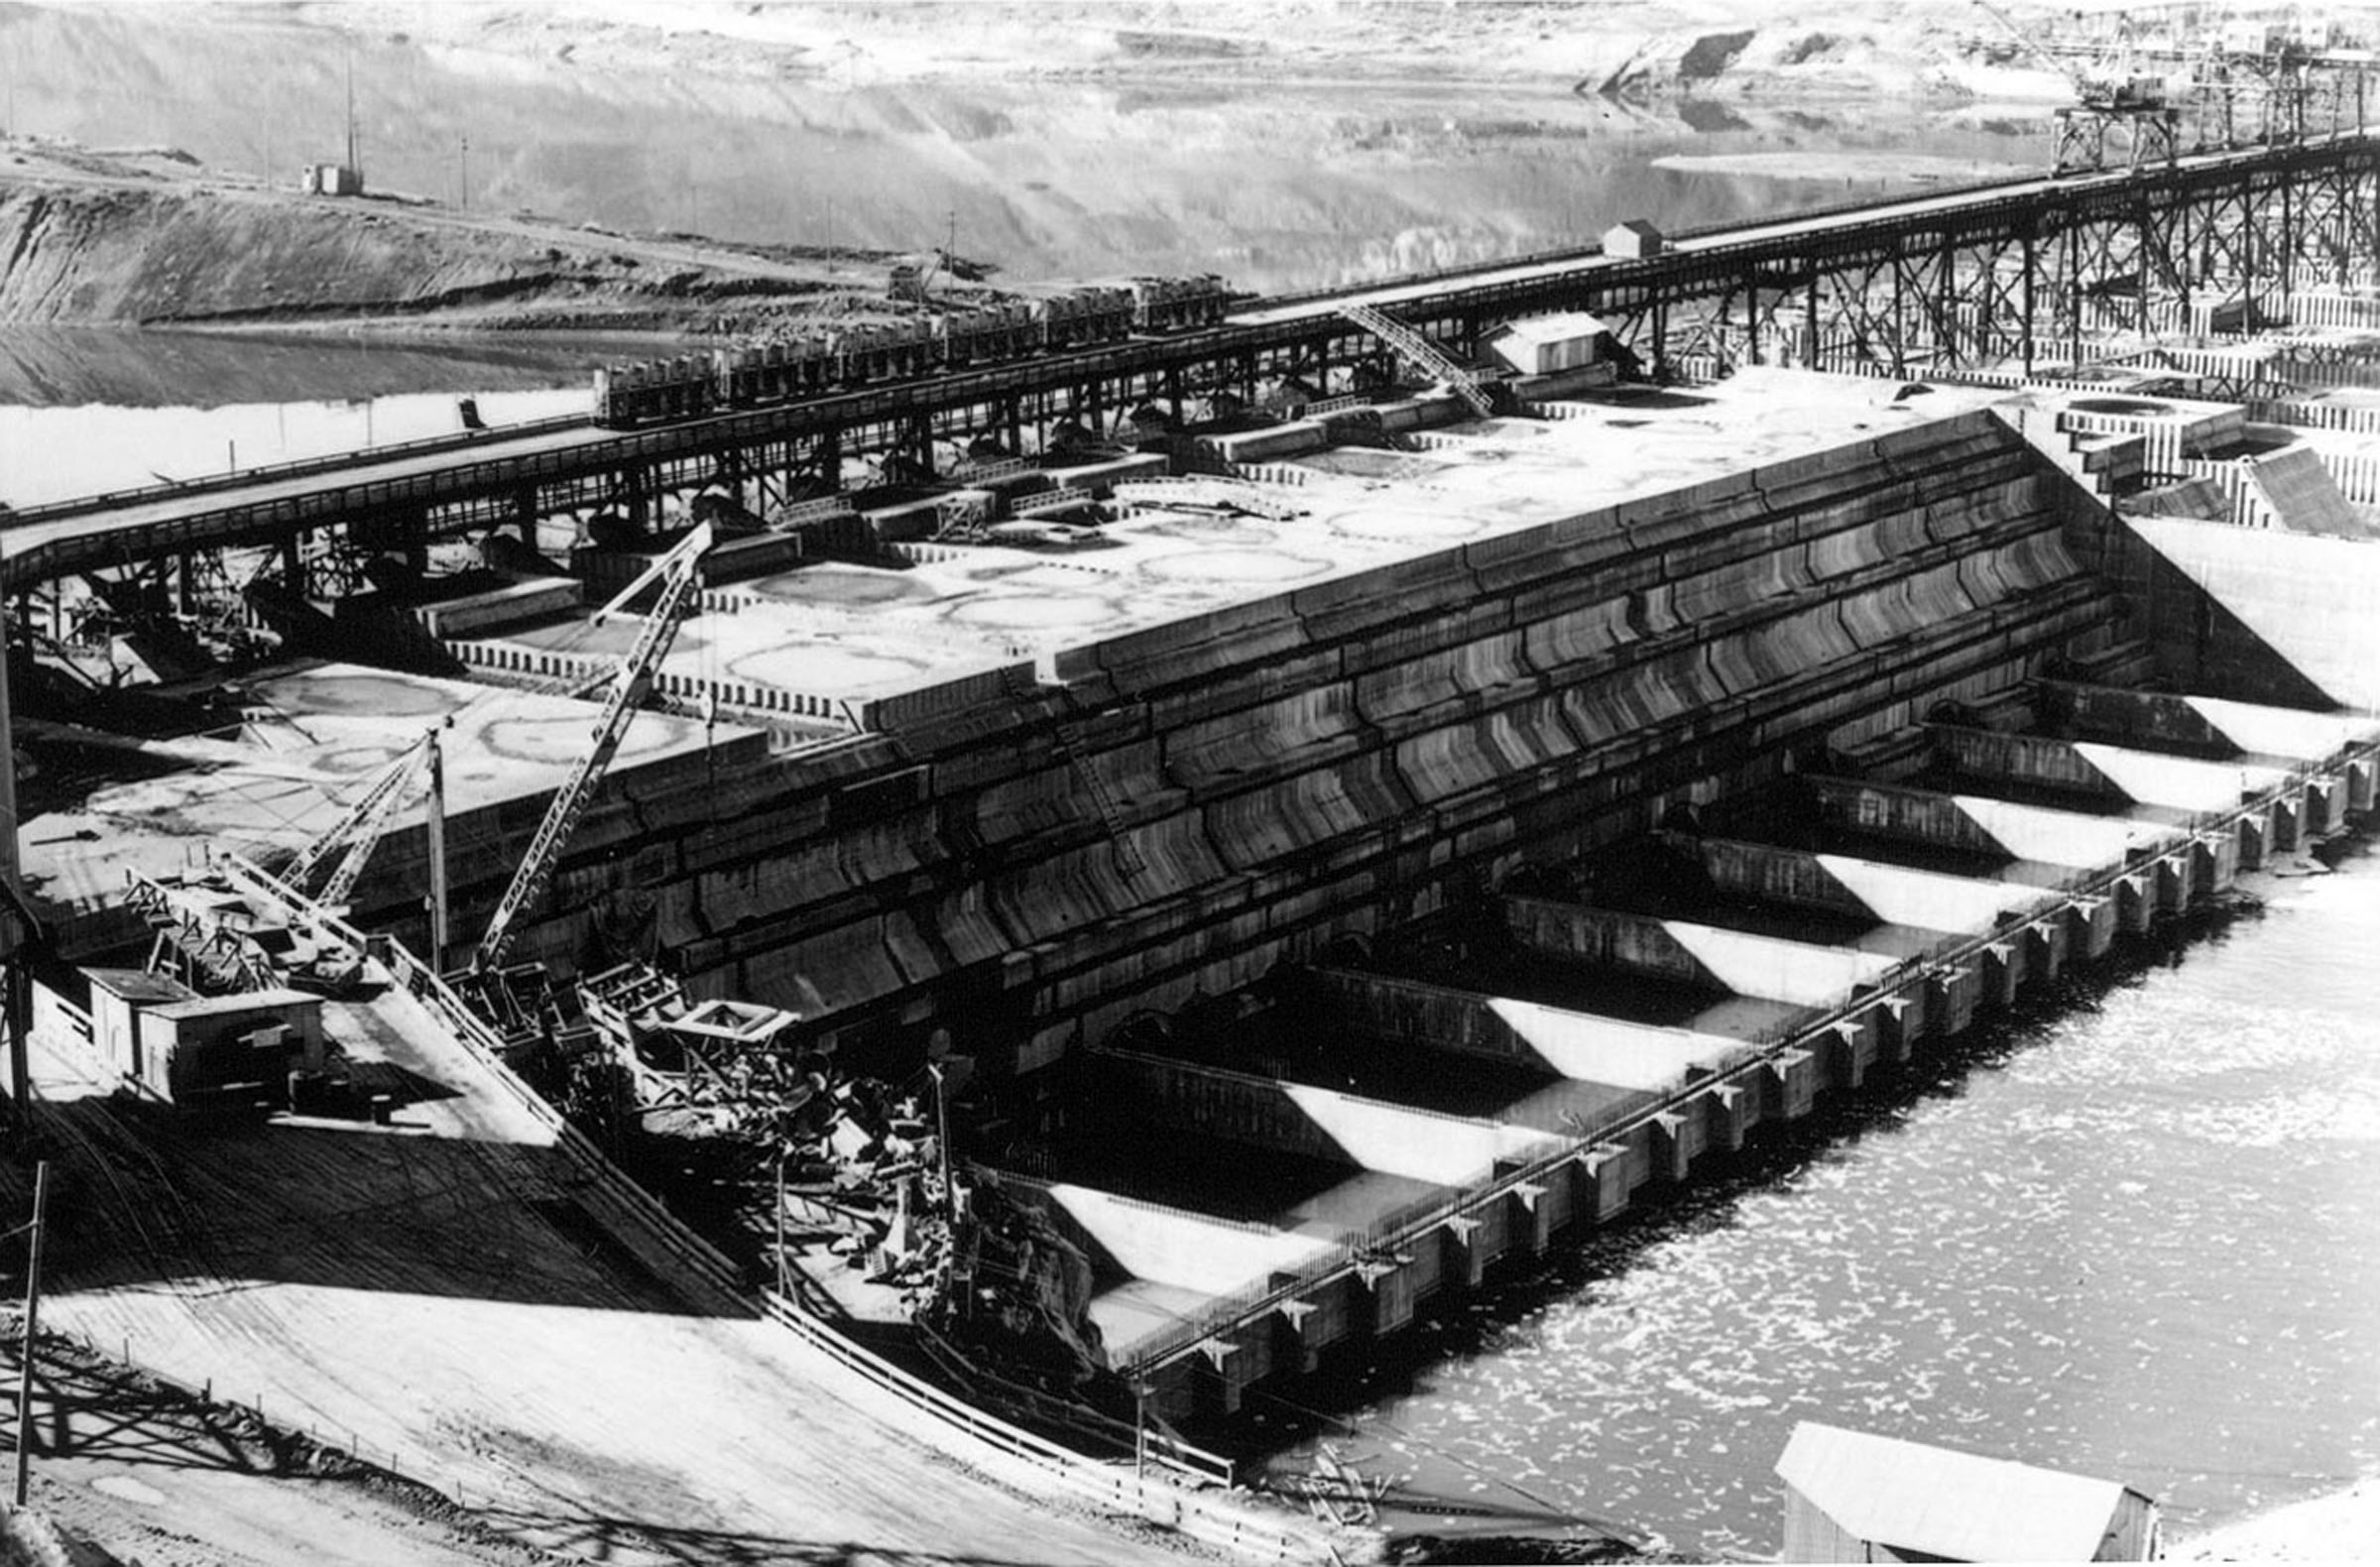 Photo taken March 9, 1938. East side view of Grand Coulee Dam.